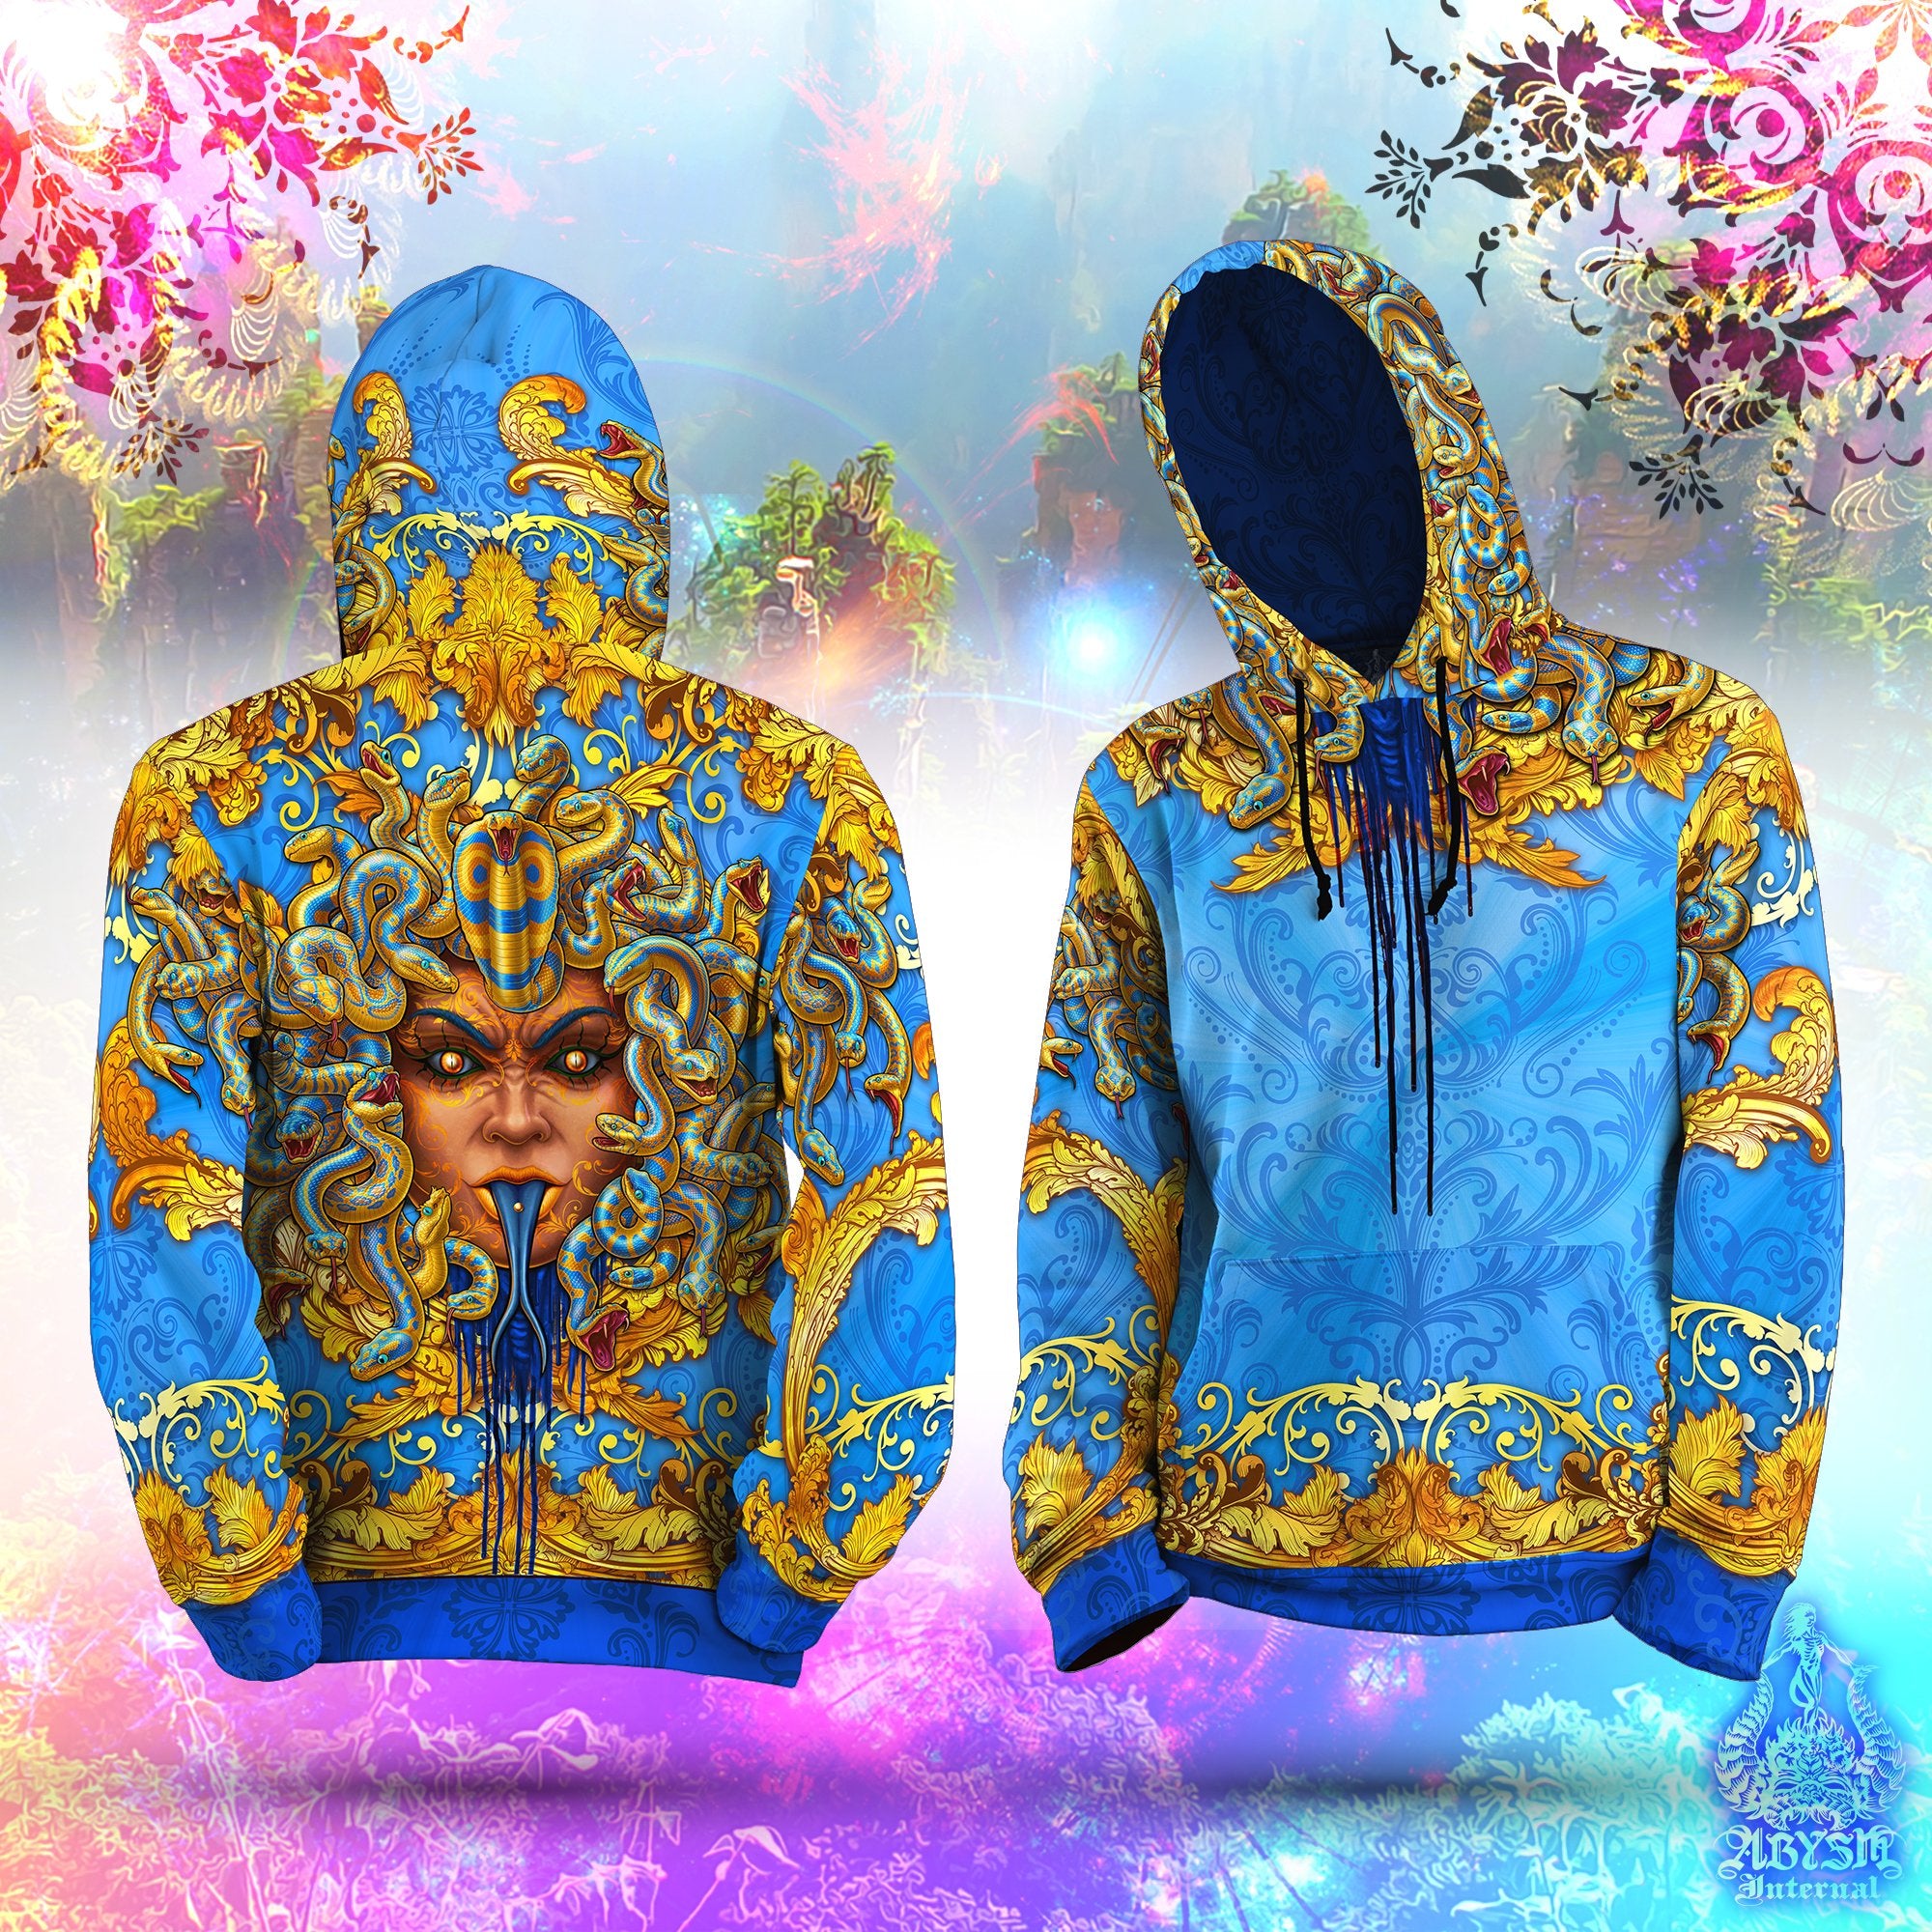 Festival Sweater, Rave Pullover, Graffiti Streetwear, Blue Indie Street Outfit, Funky Festival Hoodie, Hippie Clothing, Unisex - Medusa Skull, Cyan Gold, 2 Faces - Abysm Internal